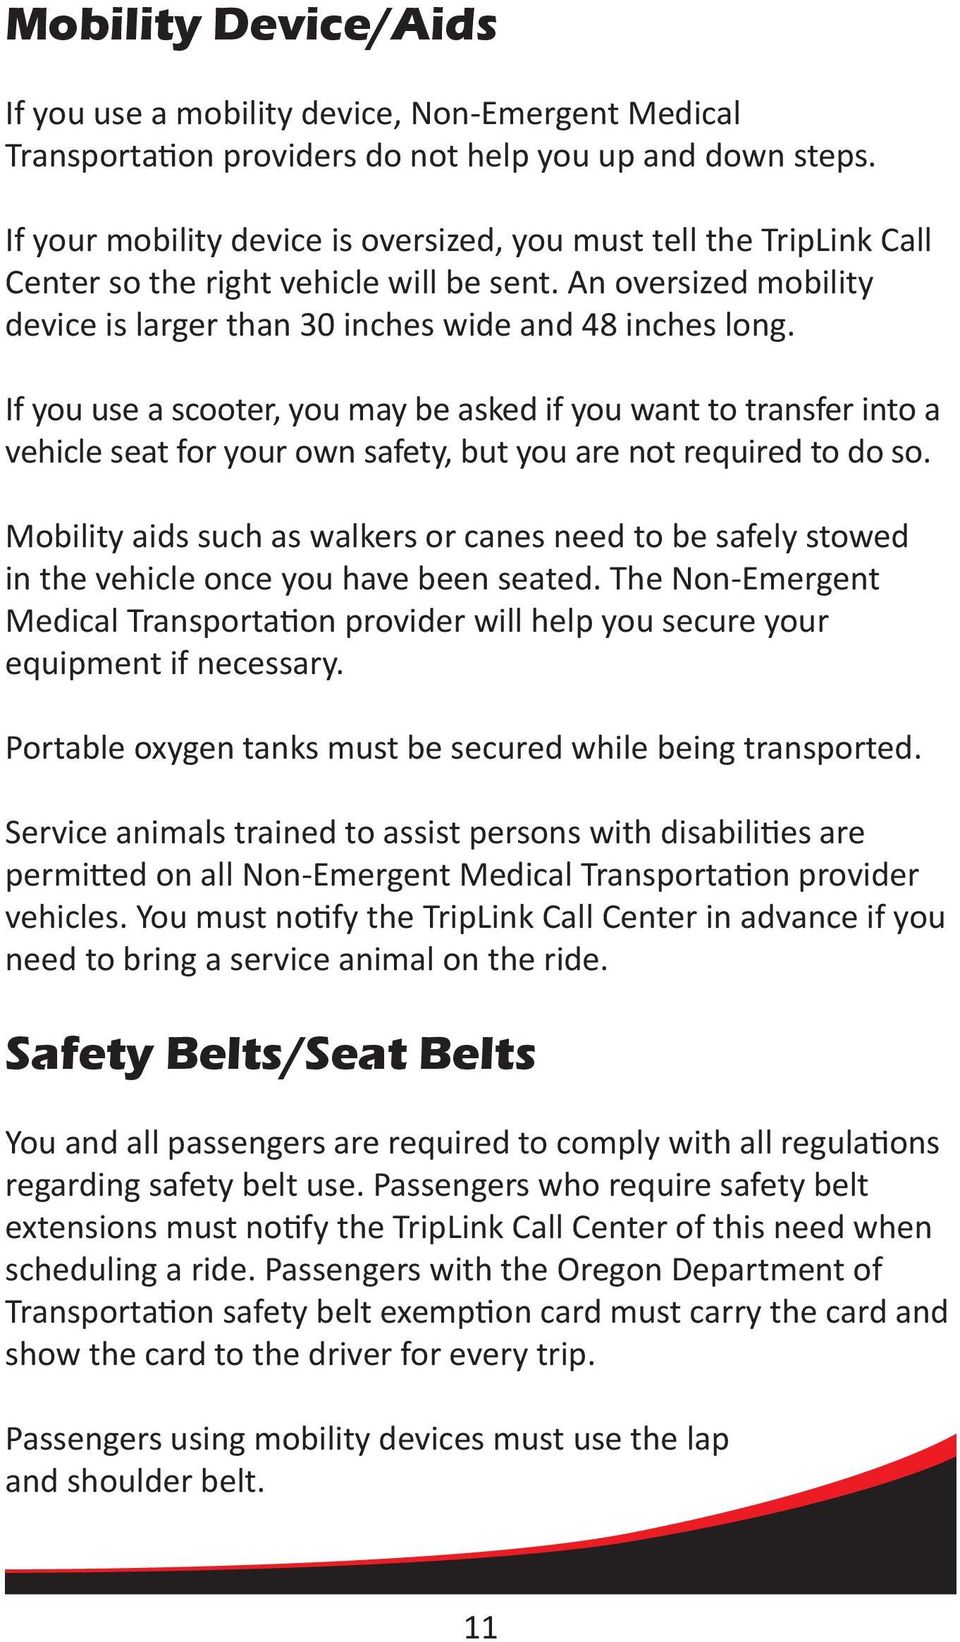 If you use a scooter, you may be asked if you want to transfer into a vehicle seat for your own safety, but you are not required to do so.